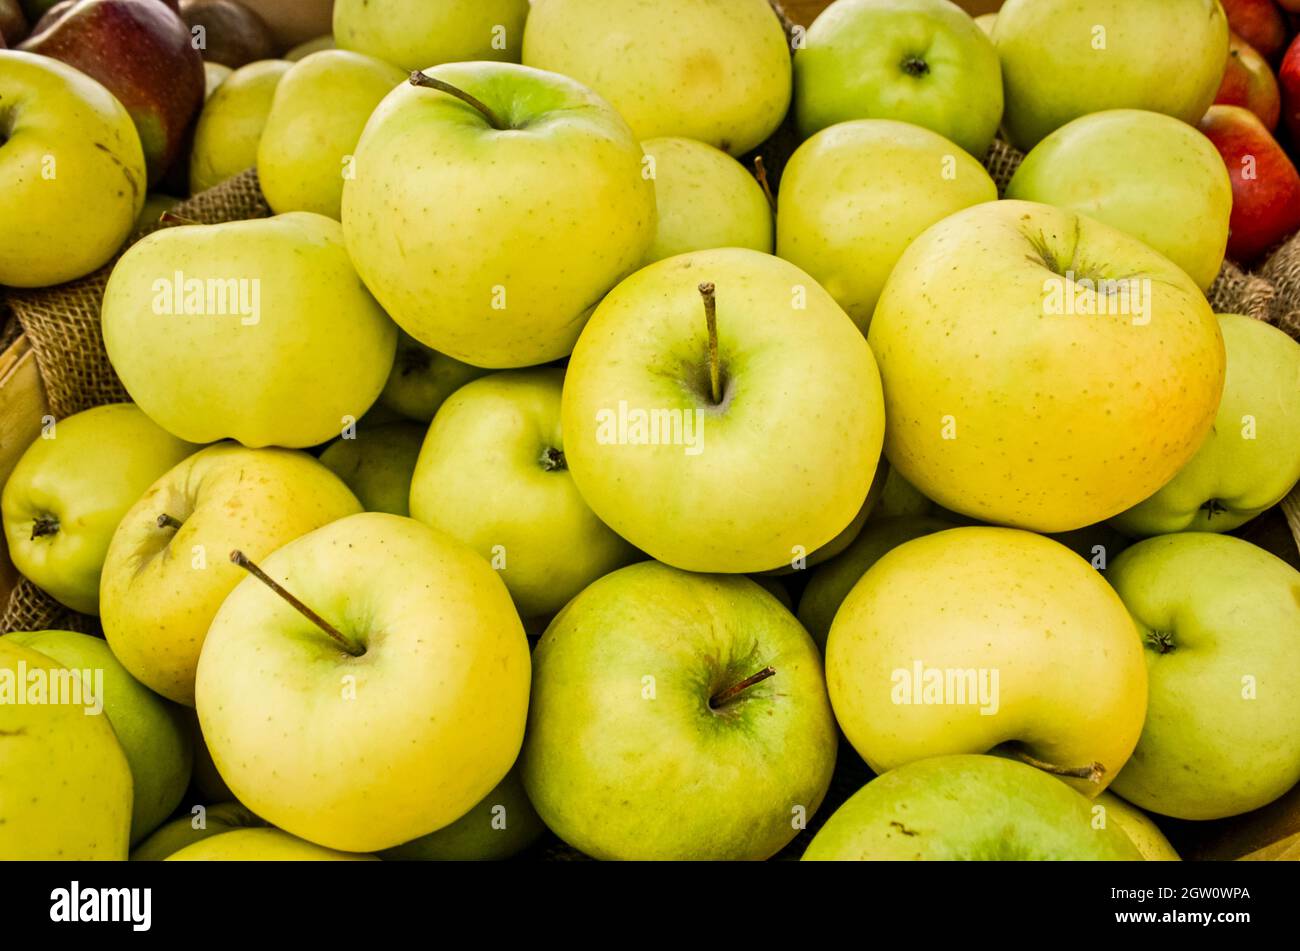 Crisp yellow delicious apples from the Hudson Valley. New York. Closeup. Stock Photo